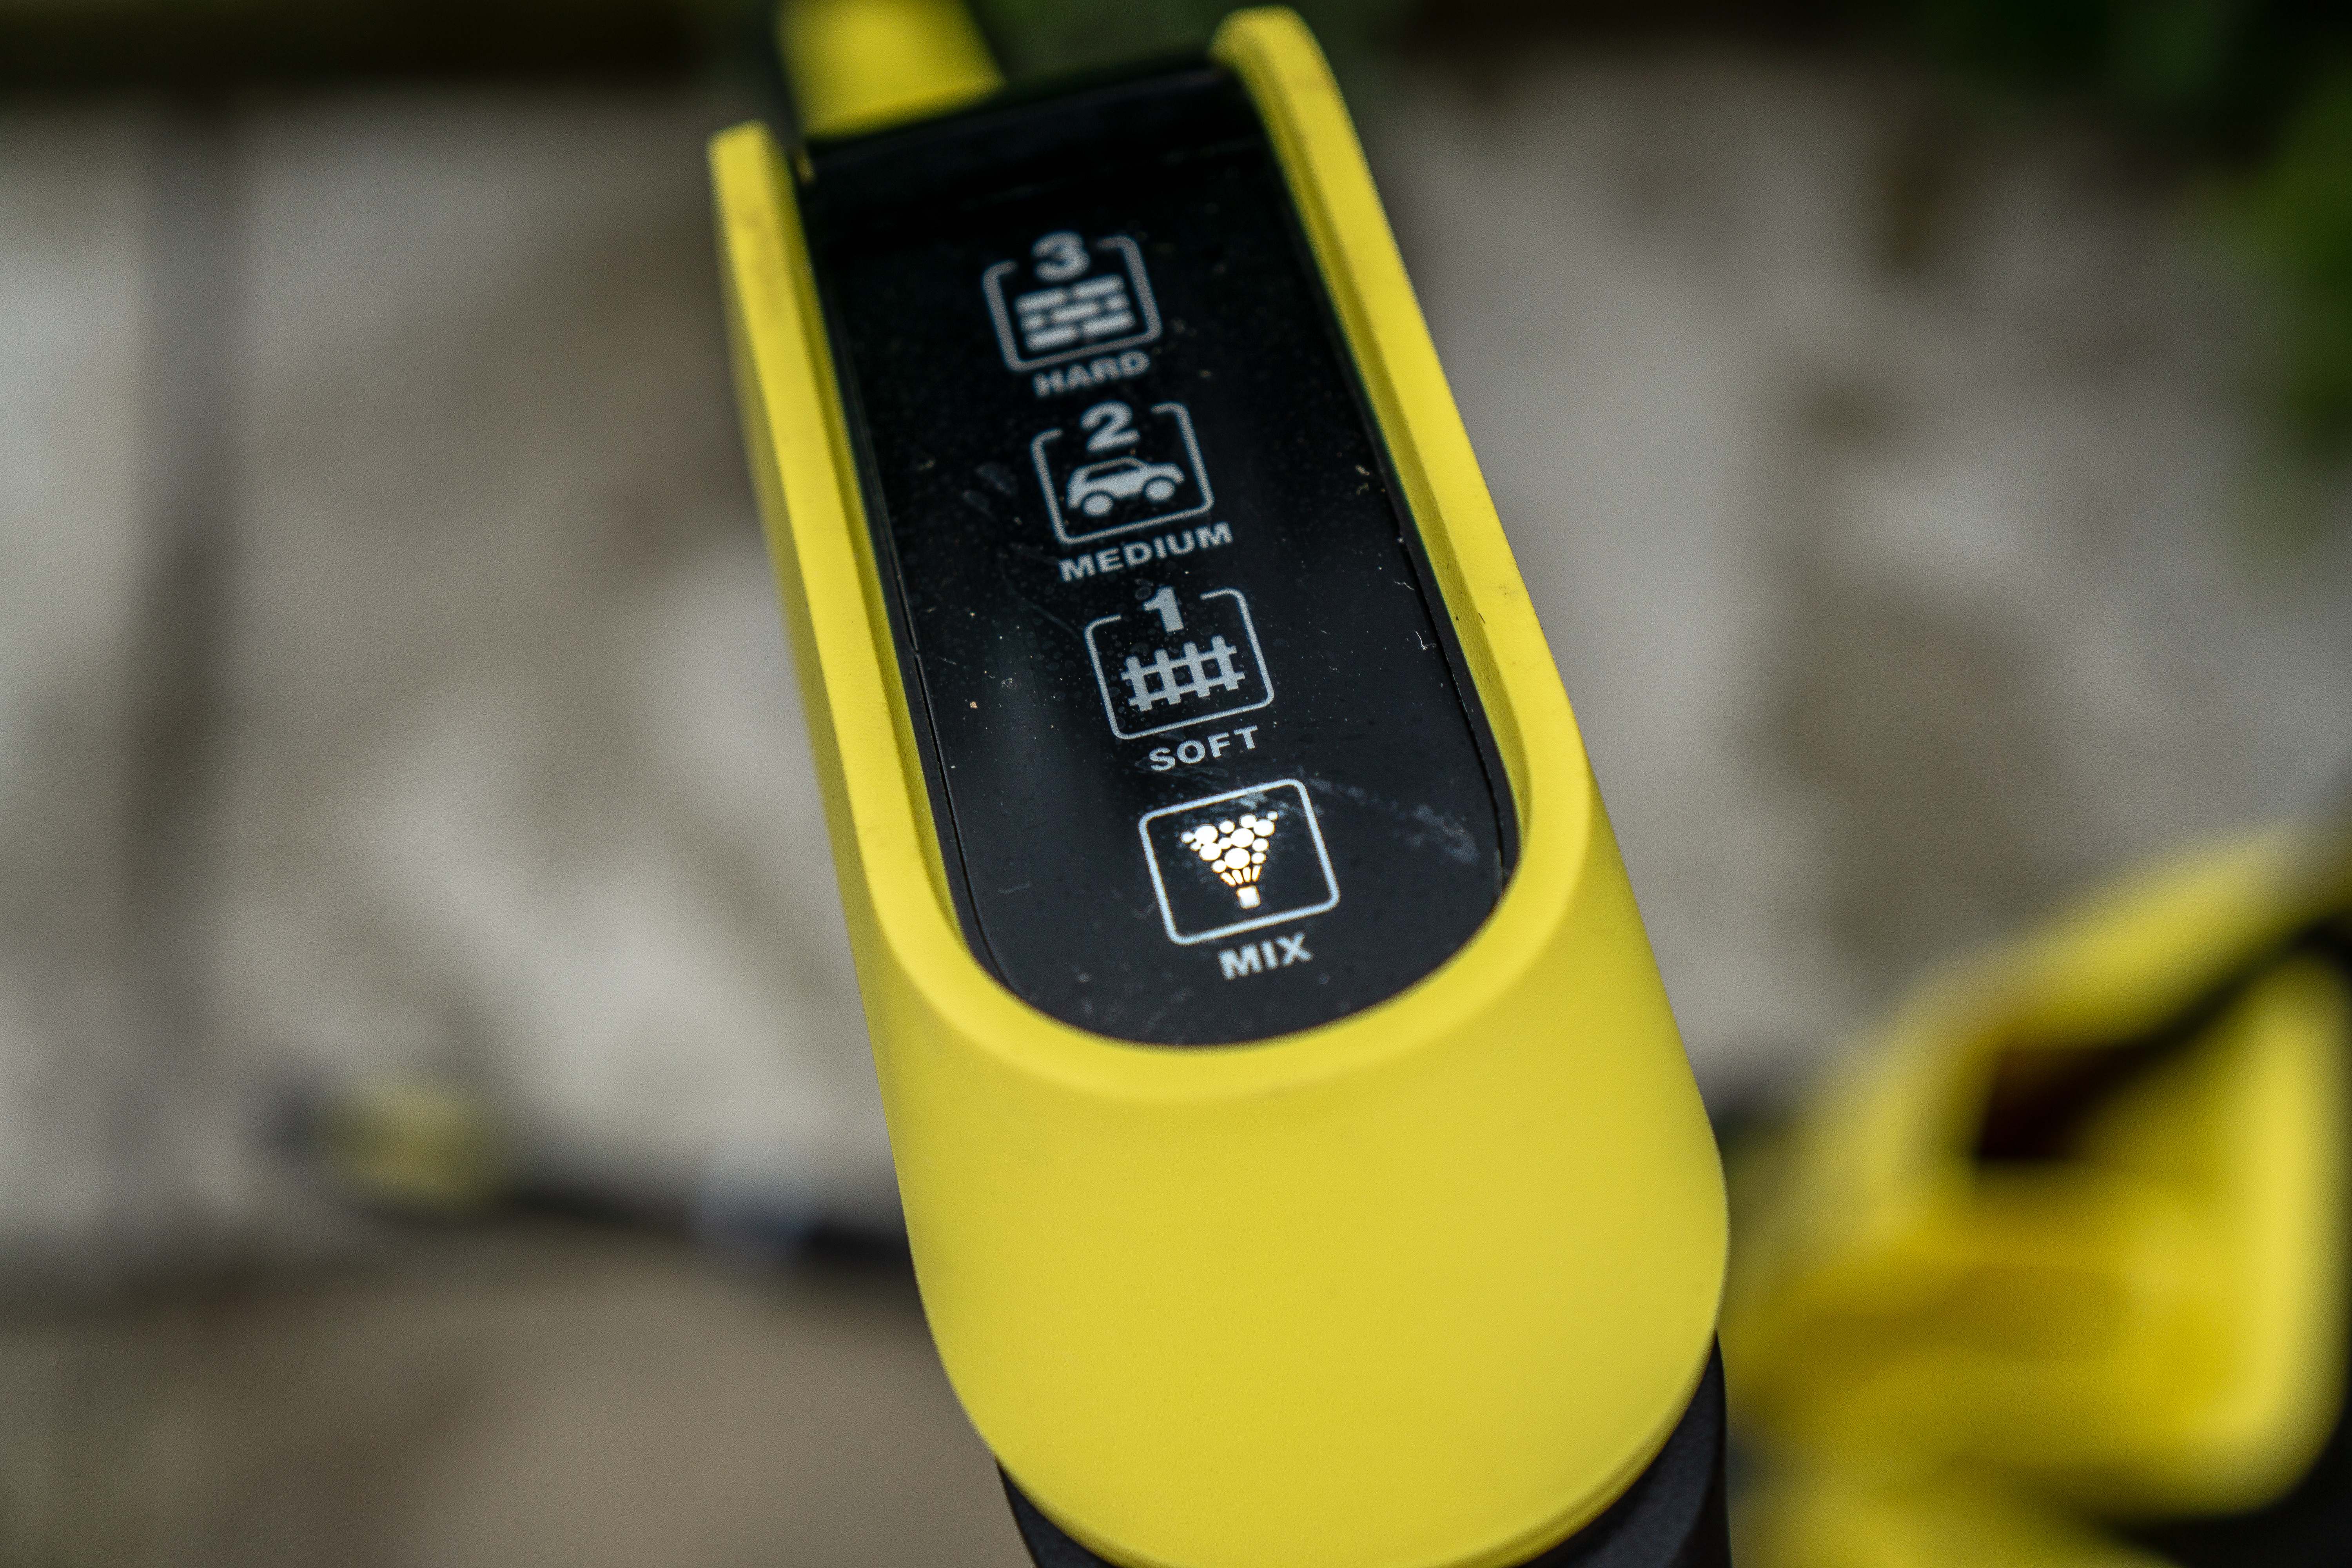 The Karcher's lance displays which power setting you're using